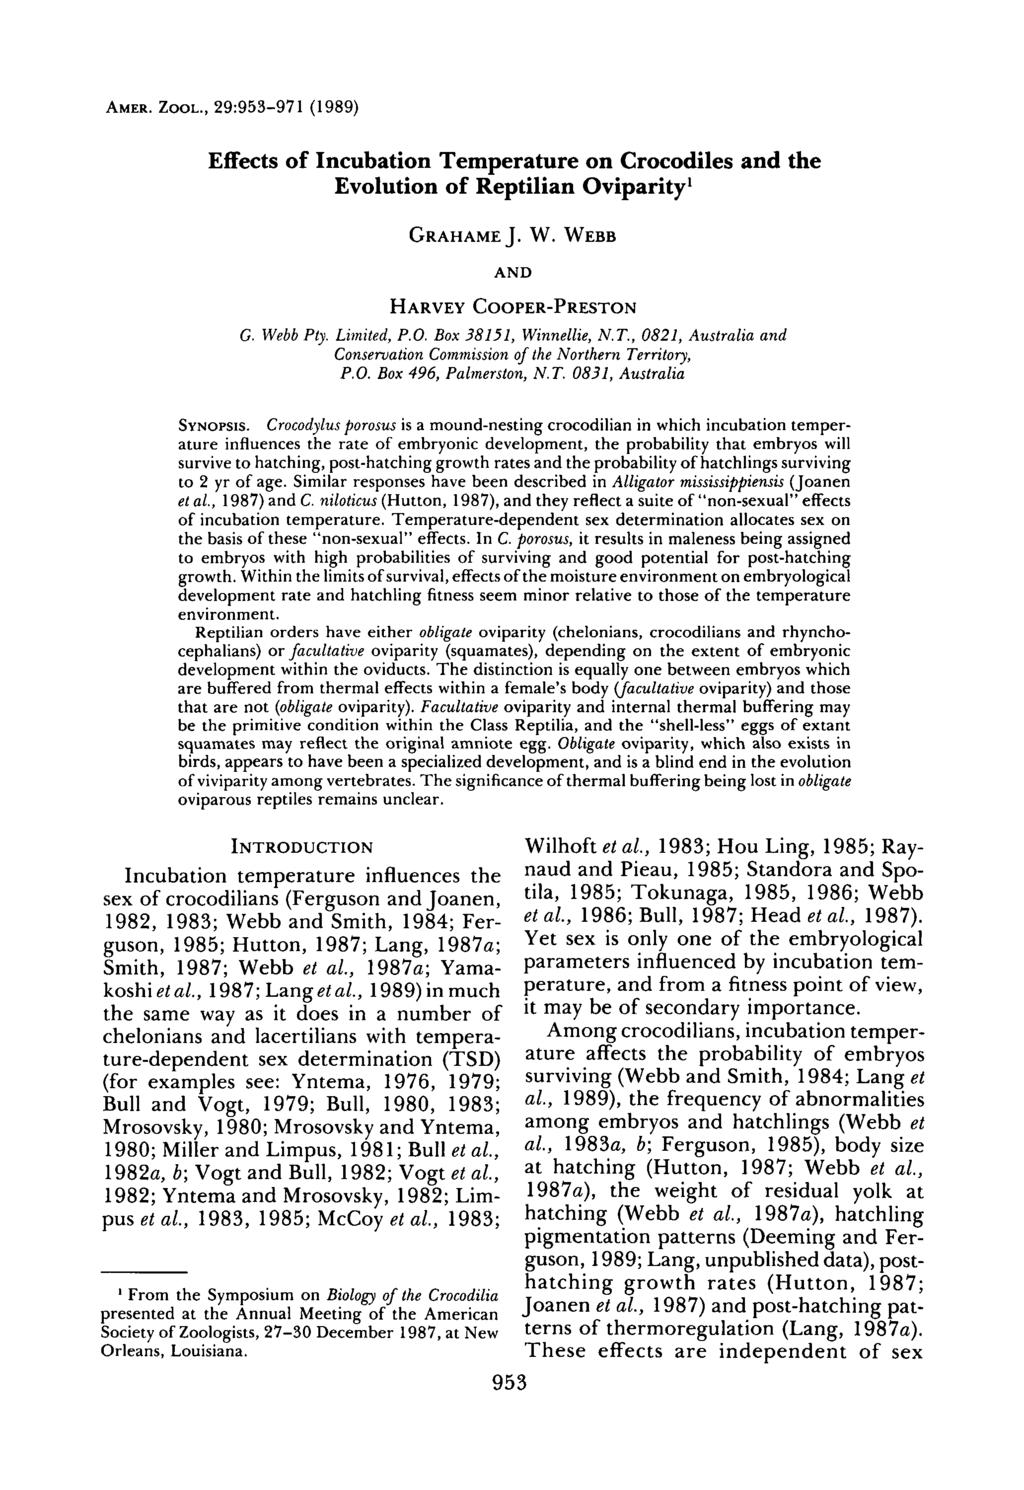 AMER. ZOOL., 29:953-971 (1989) Effects of Incubation Temperature on Crocodiles and the Evolution of Reptilian Oviparity 1 GRAHAMEJ. W. WEBB AND HARVEY COOPER-PRESTON G. Webb Ply. Limited, P.O. Box 38151, Winnellie, N.